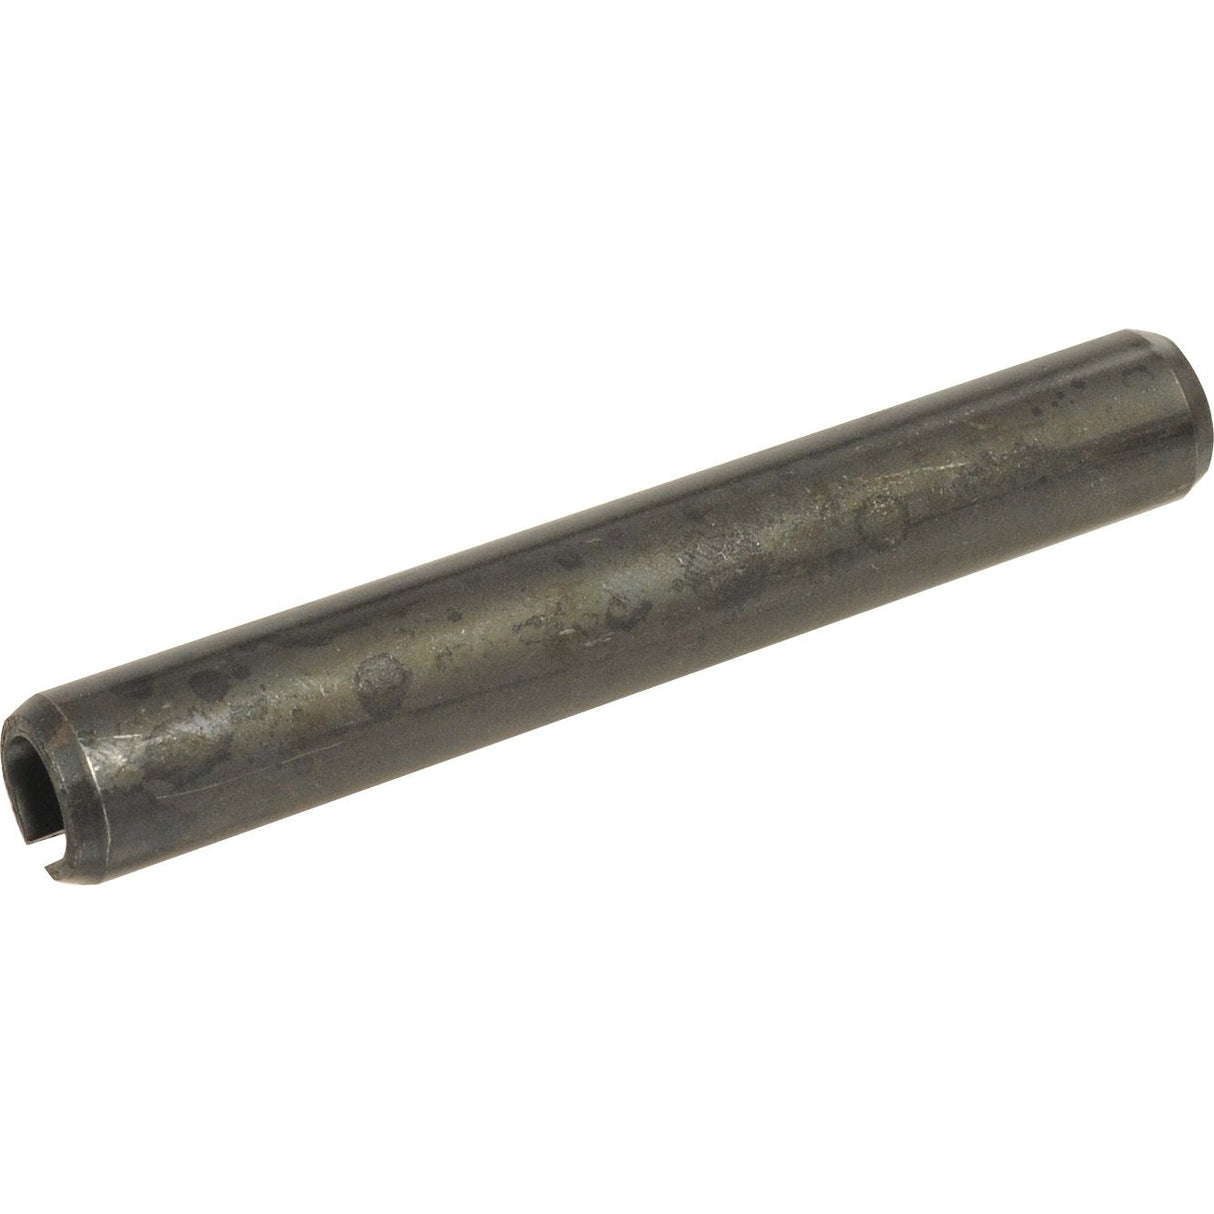 Imperial Roll Pin, Pin ⌀1/2'' x 2 1/4'' - S.1163 - Farming Parts